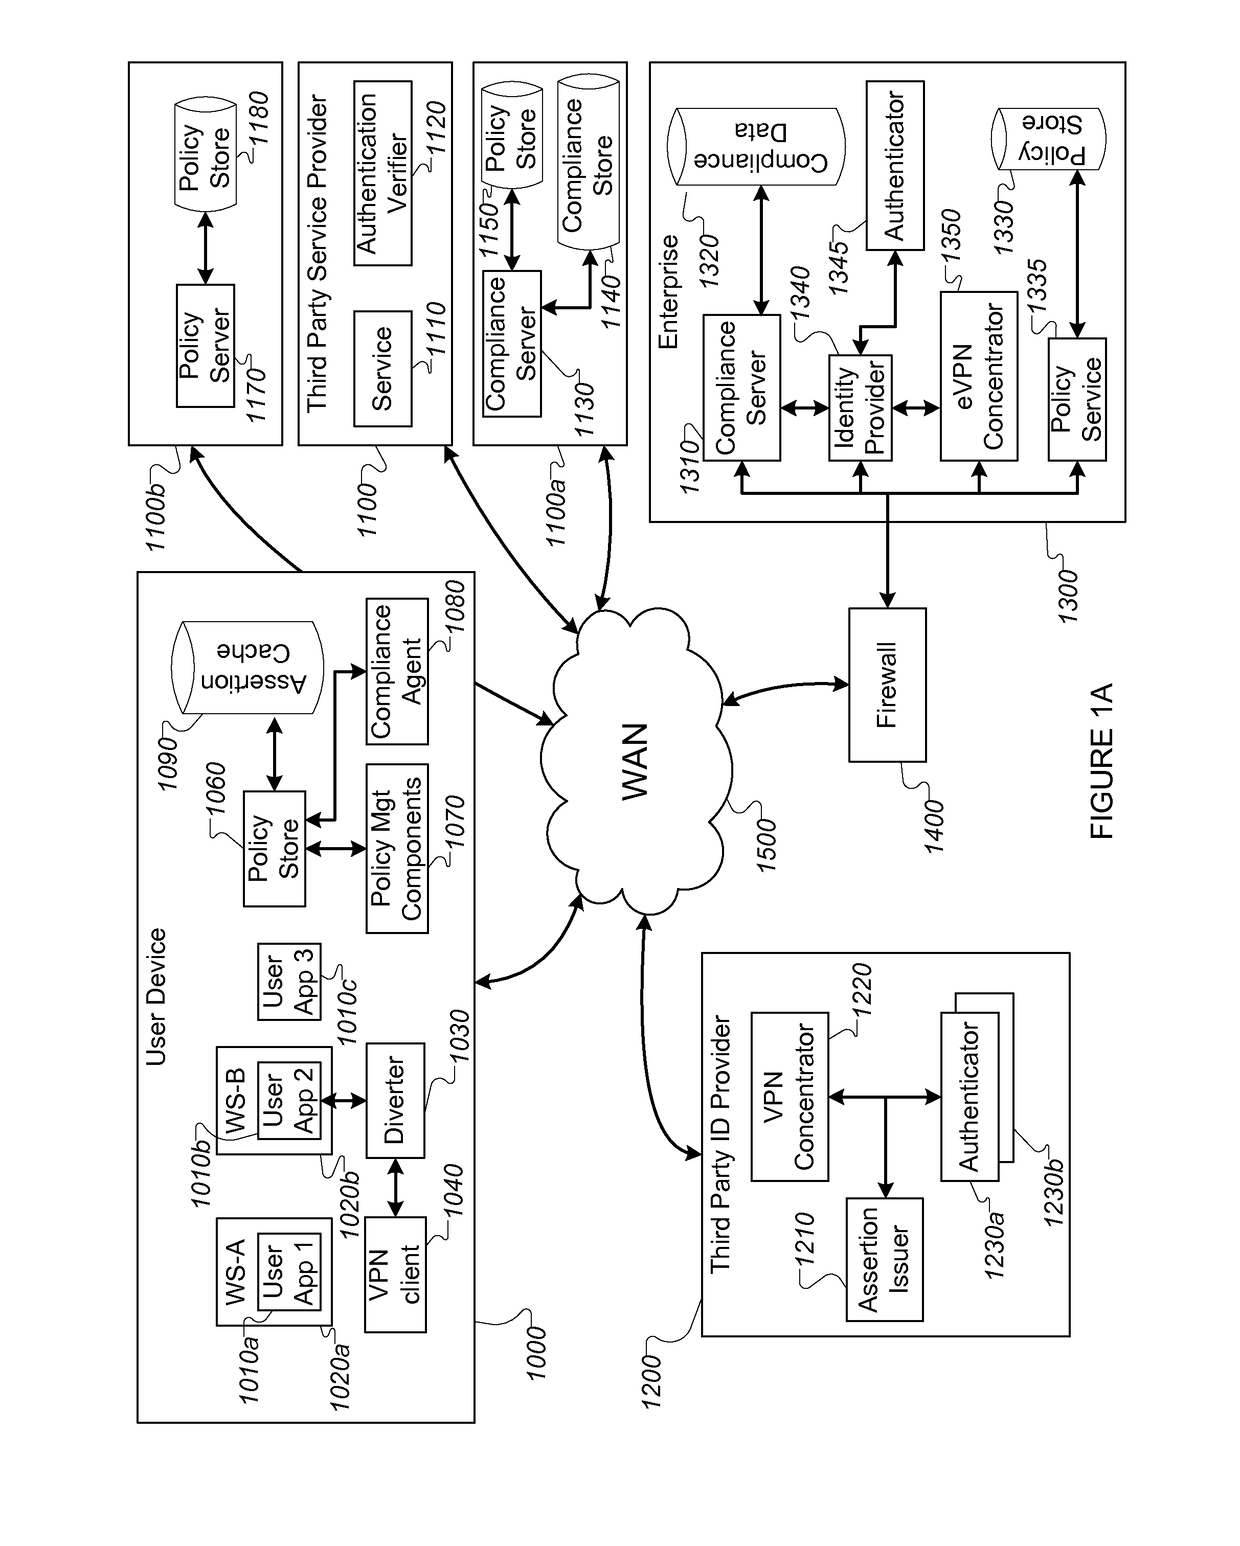 Method for authentication and assuring compliance of devices accessing external services